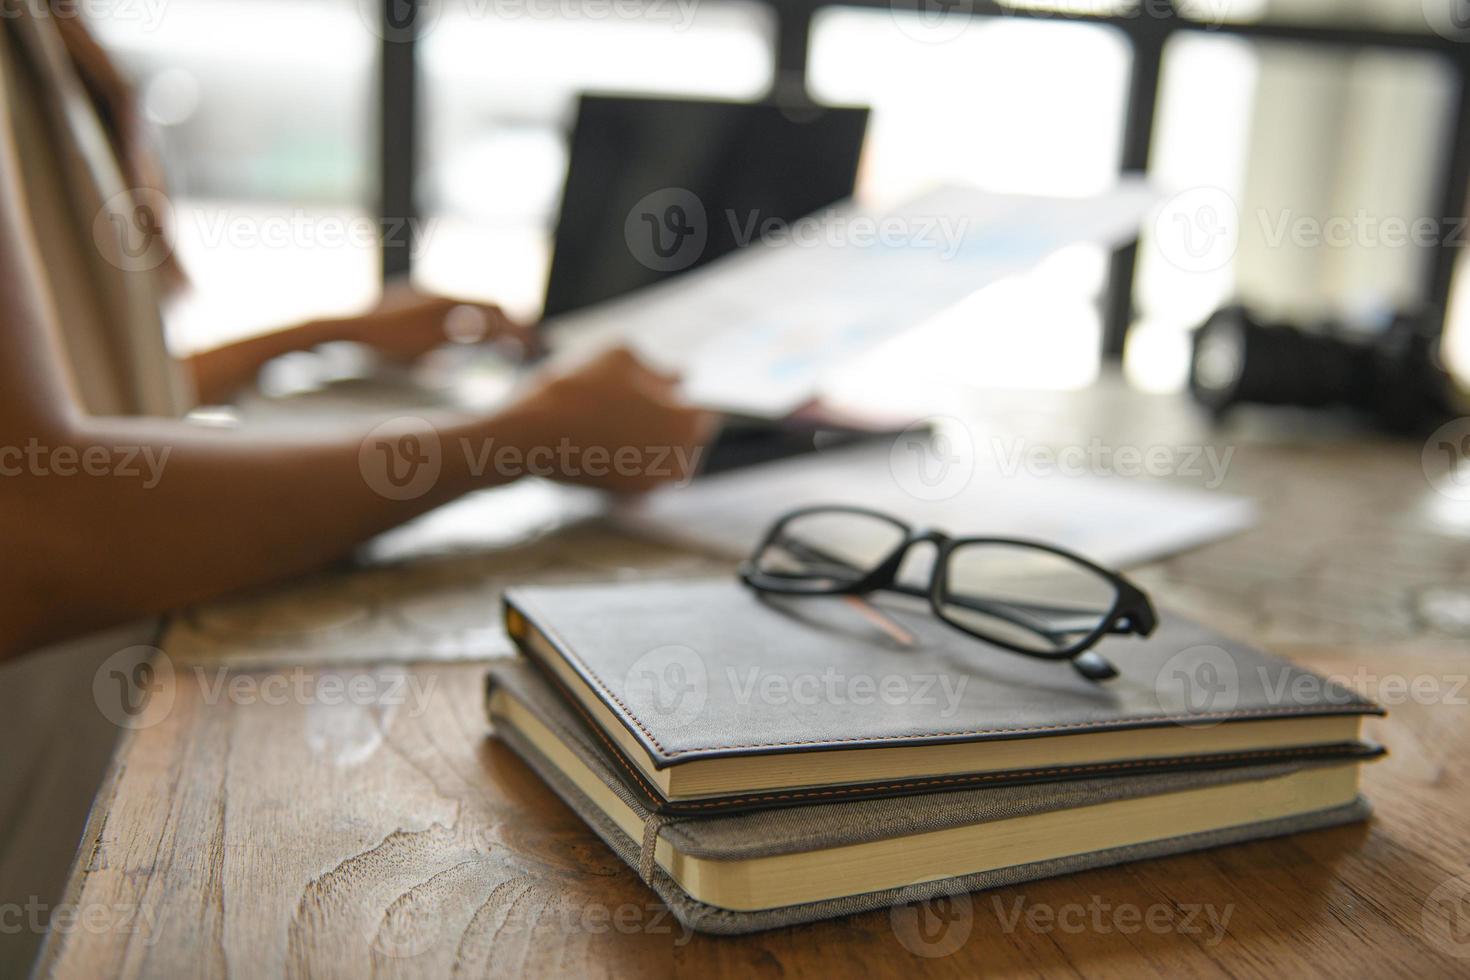 Glasses placed on notebooks, background blurred people are sitting using laptop. photo